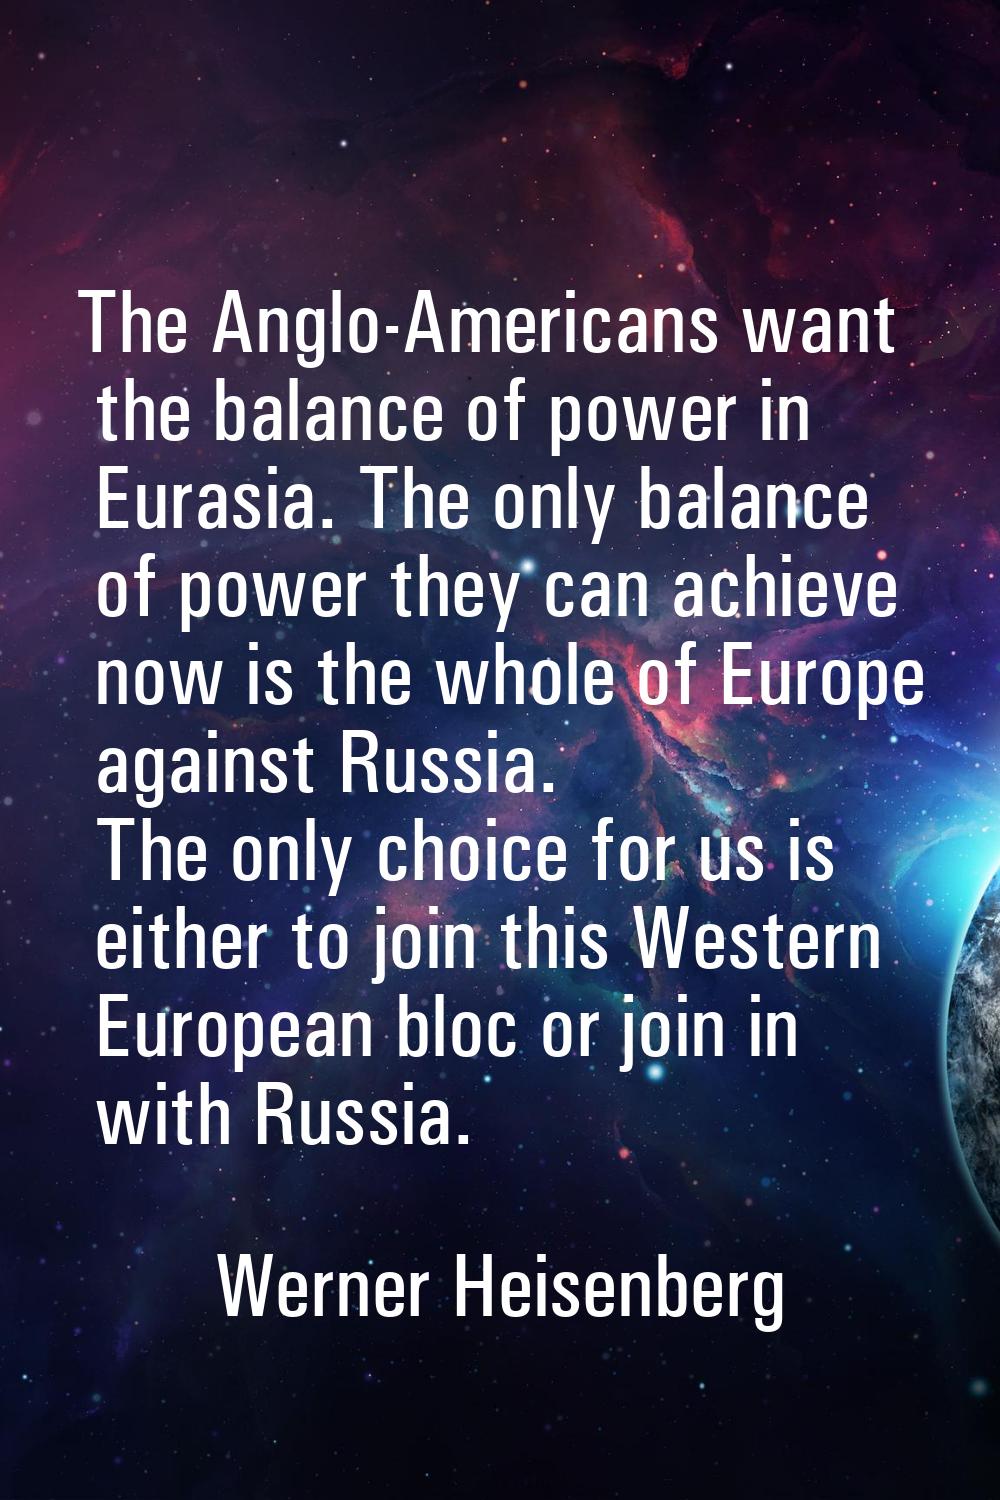 The Anglo-Americans want the balance of power in Eurasia. The only balance of power they can achiev